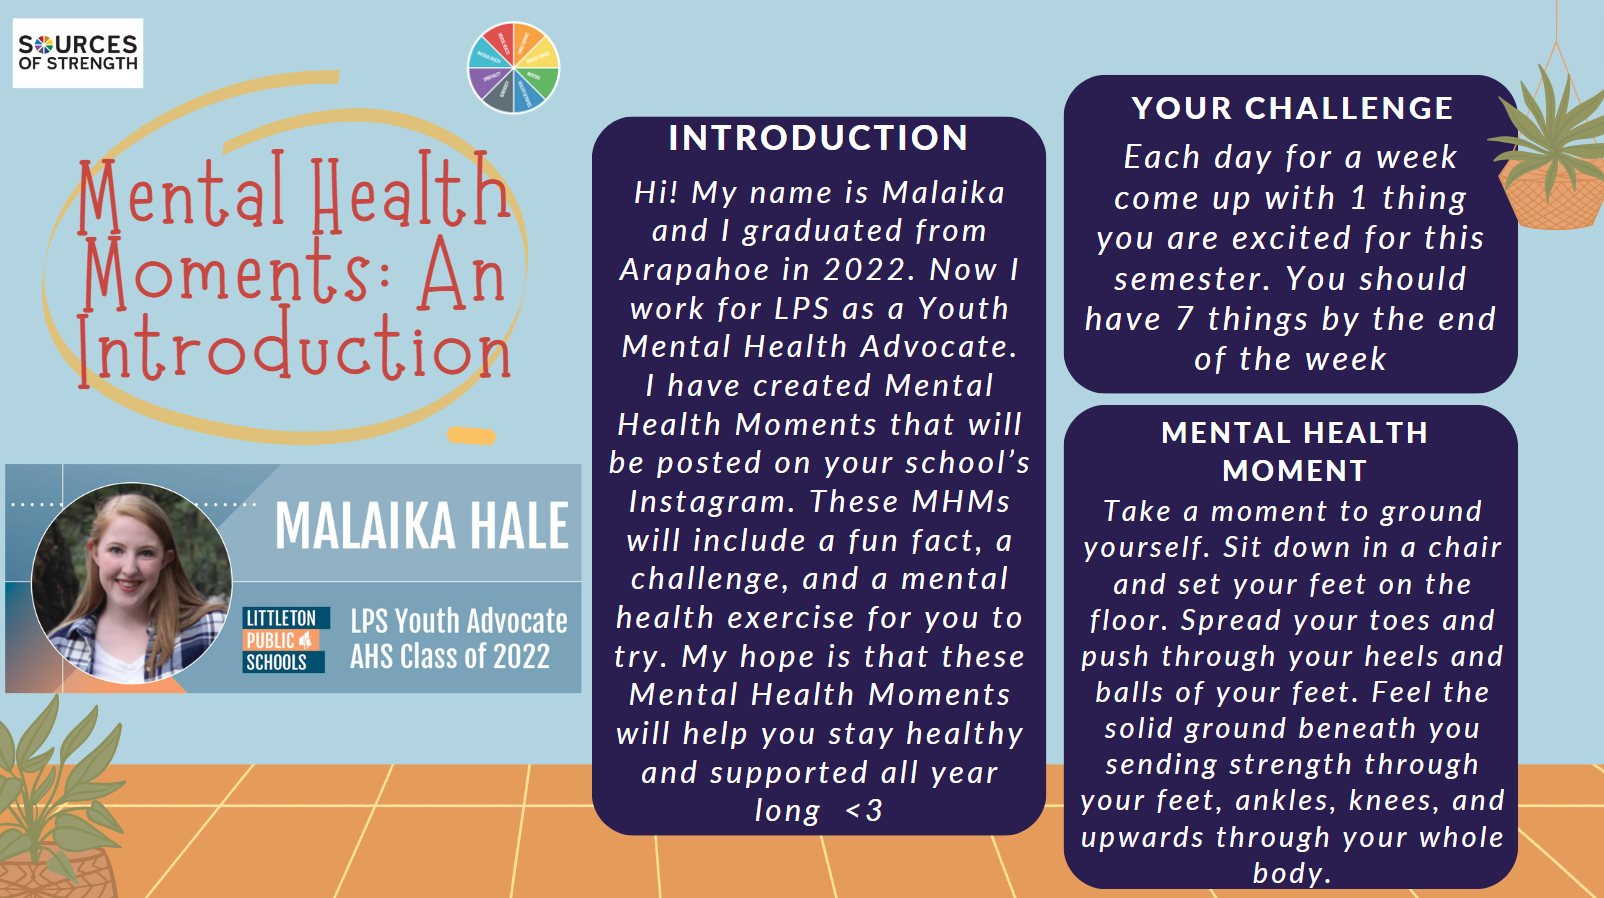 Mental Health Moments: An Introduction - Malaika Hale LPS Youth Advocate AHS Class of 2022 (full text under the image)